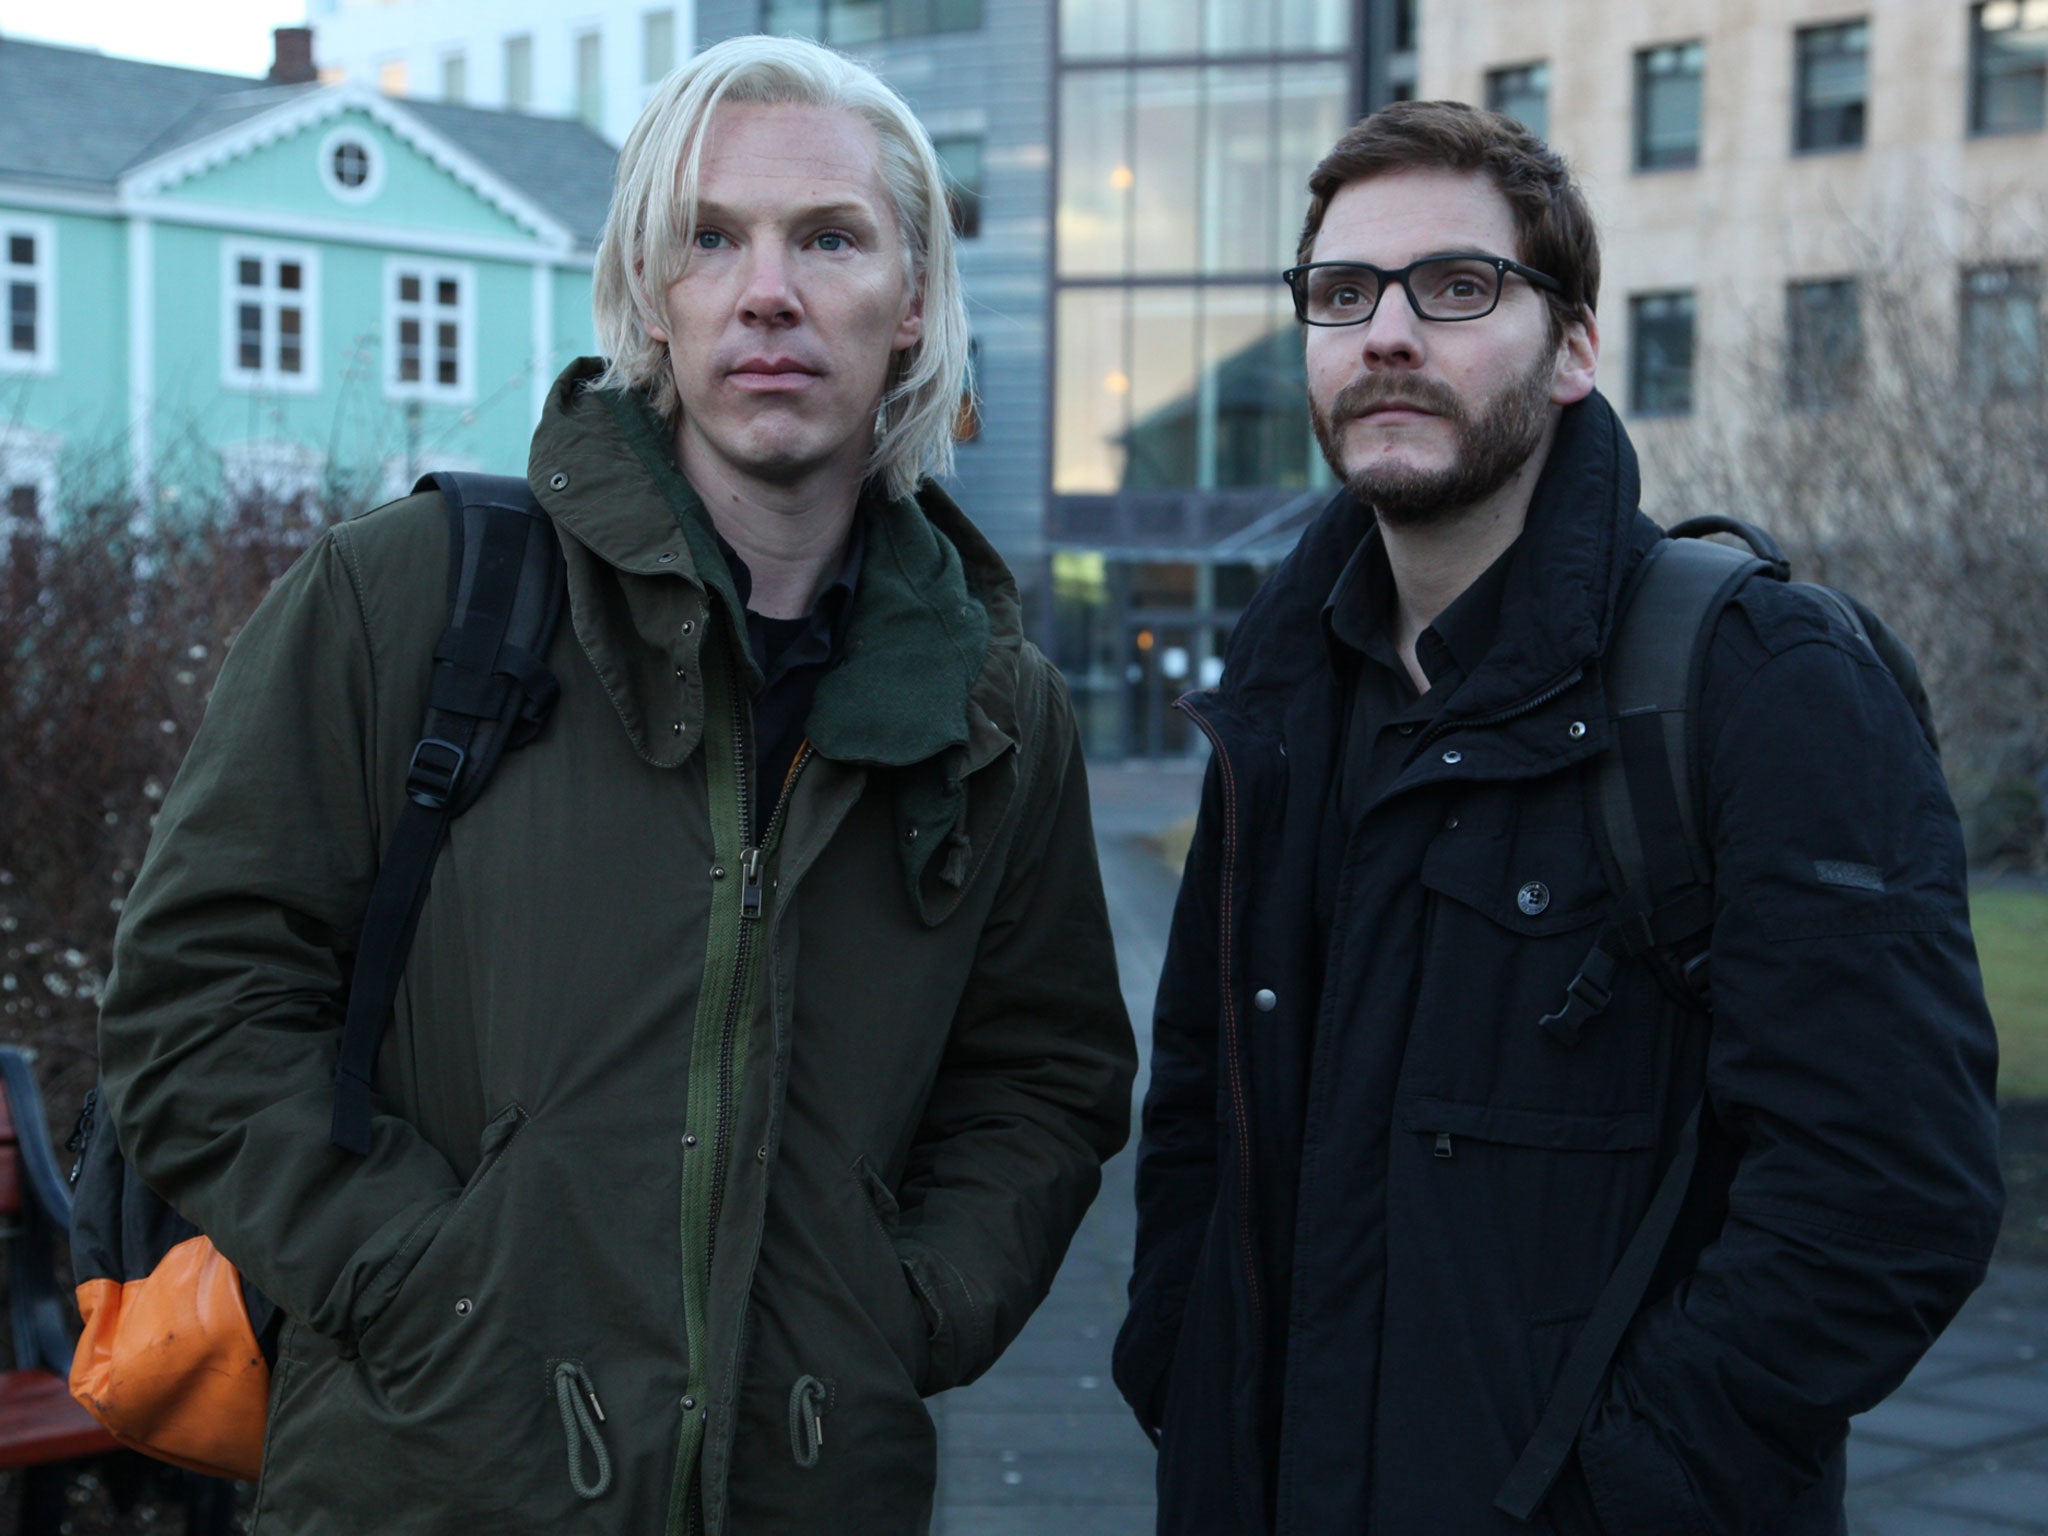 the fifth estate movie review